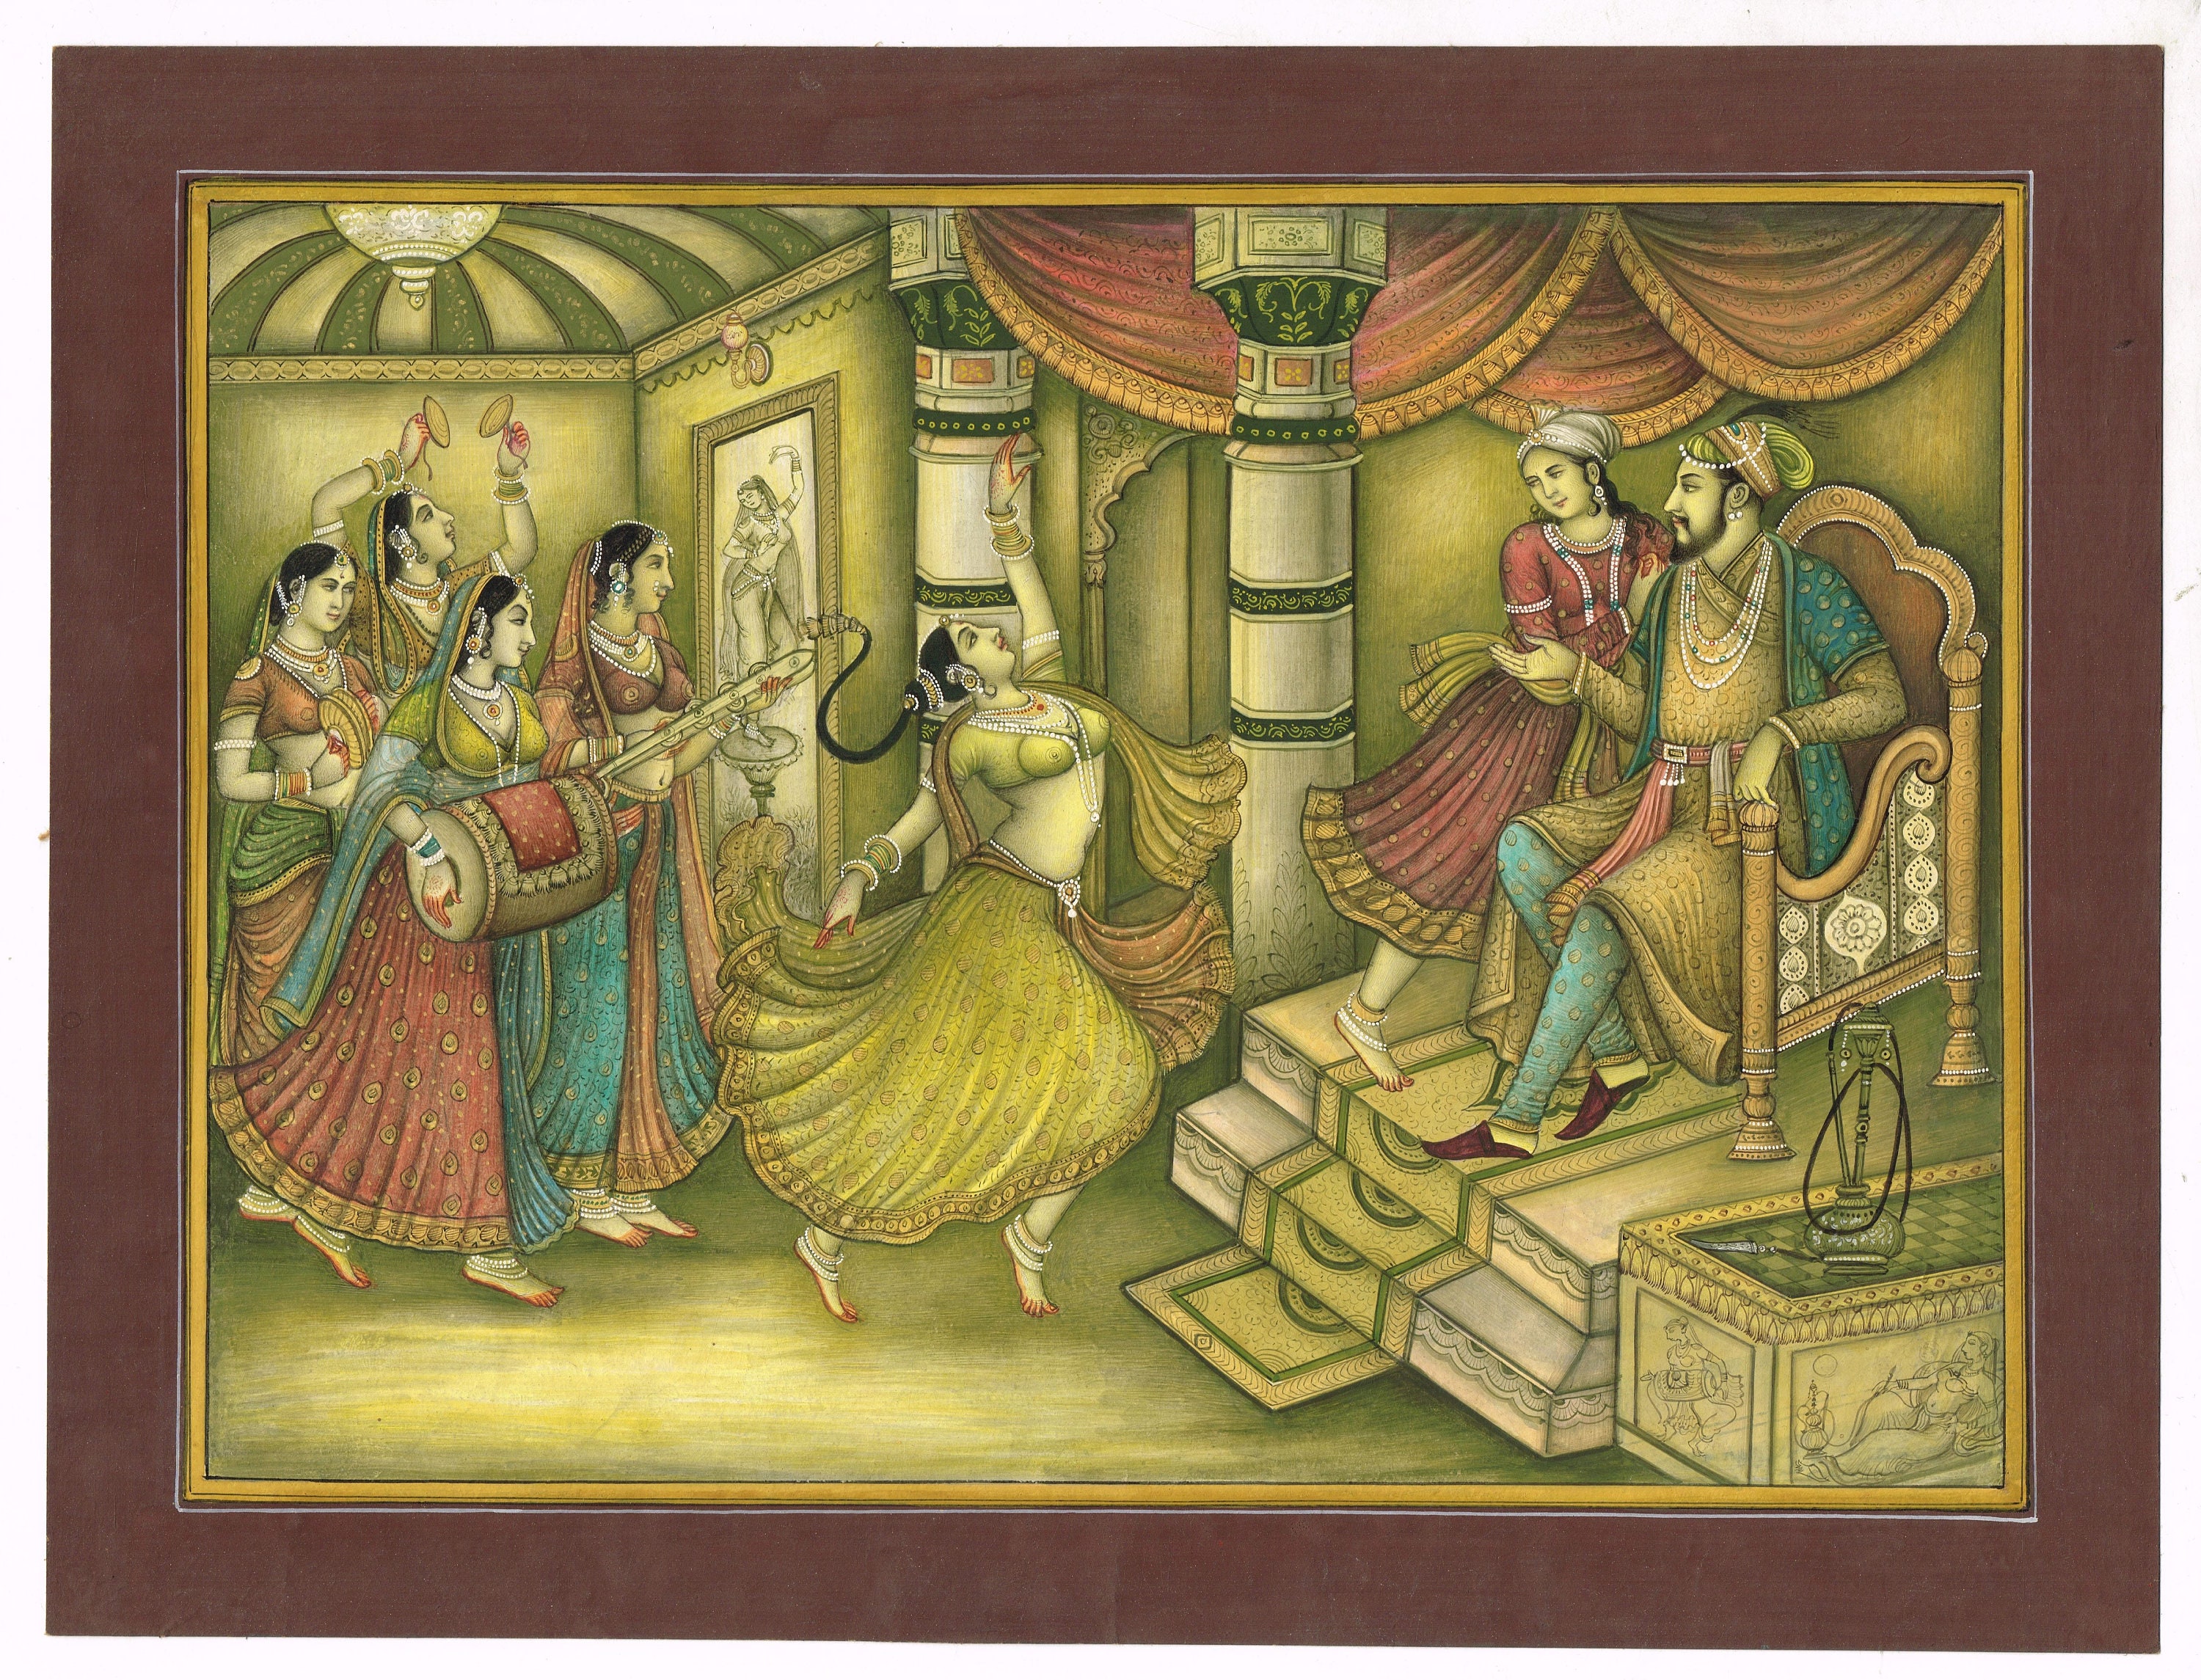 Mughal Miniature Painting of King Shahjahan & Queen Mumtaz - Etsy